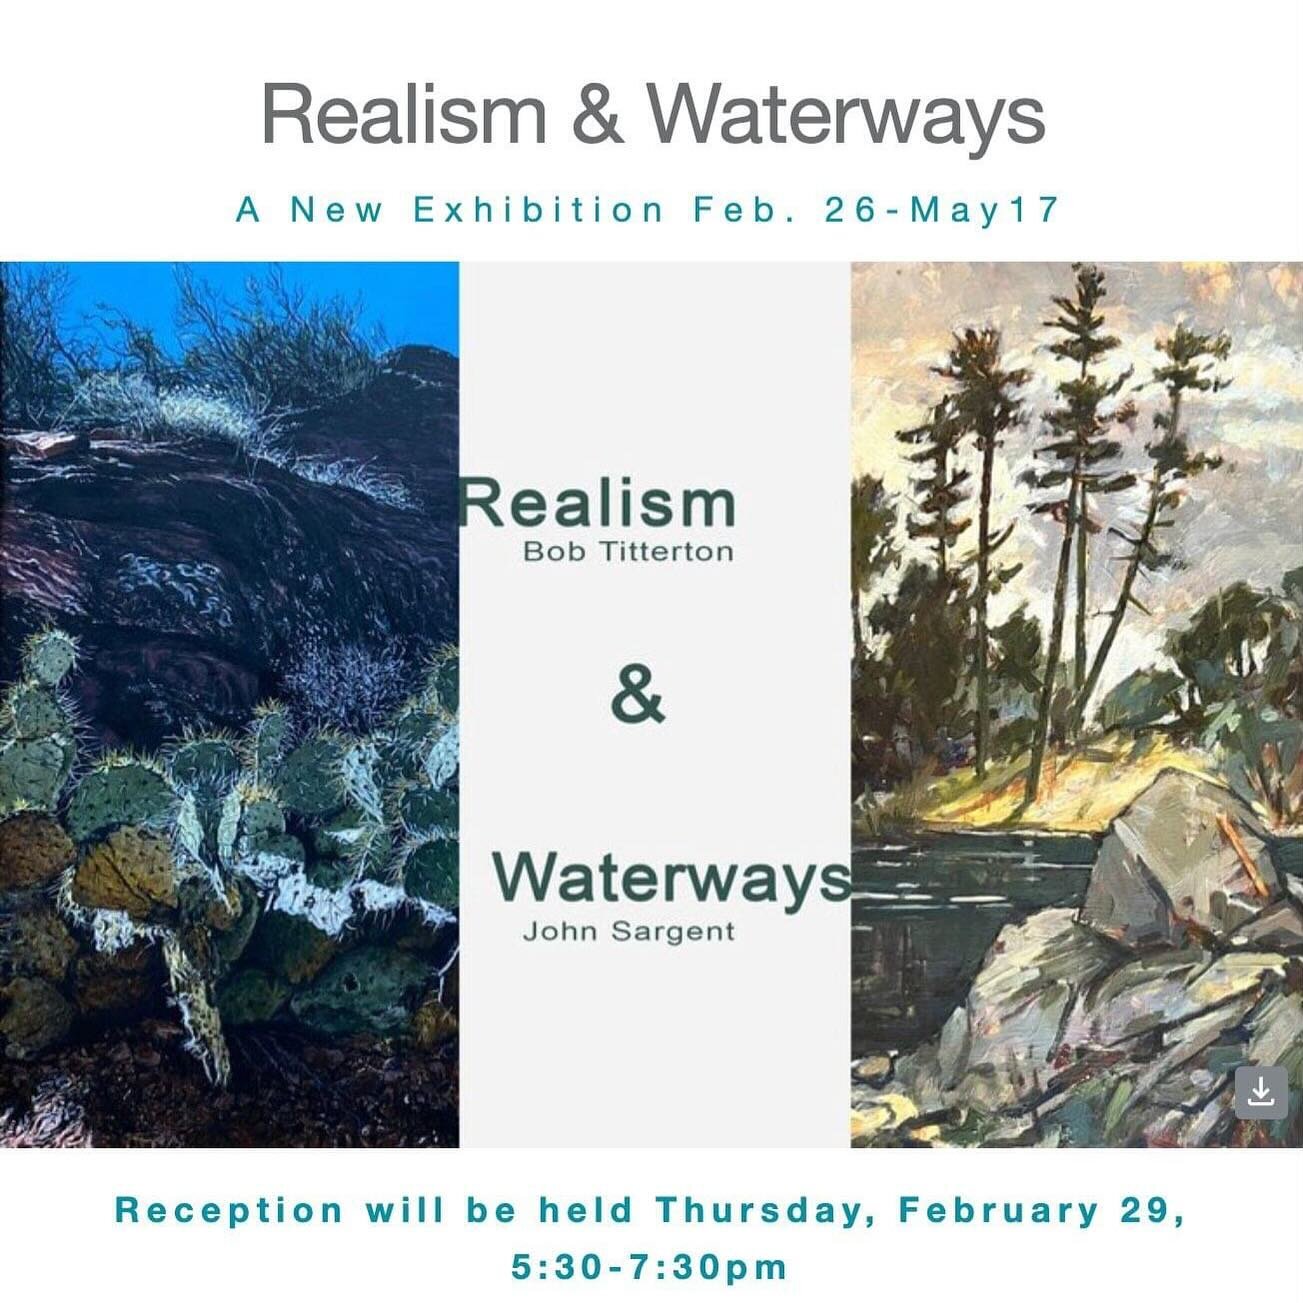 NEW EXHIBITION: Opening Reception Thursday, February, 29th, 5:30-7:30pm. ALL are welcome! 🥂
Realism and Waterways explores two dynamic, varied techniques in oil painting both in subject and application. Our Folley Hall space upstairs hosts detailed 